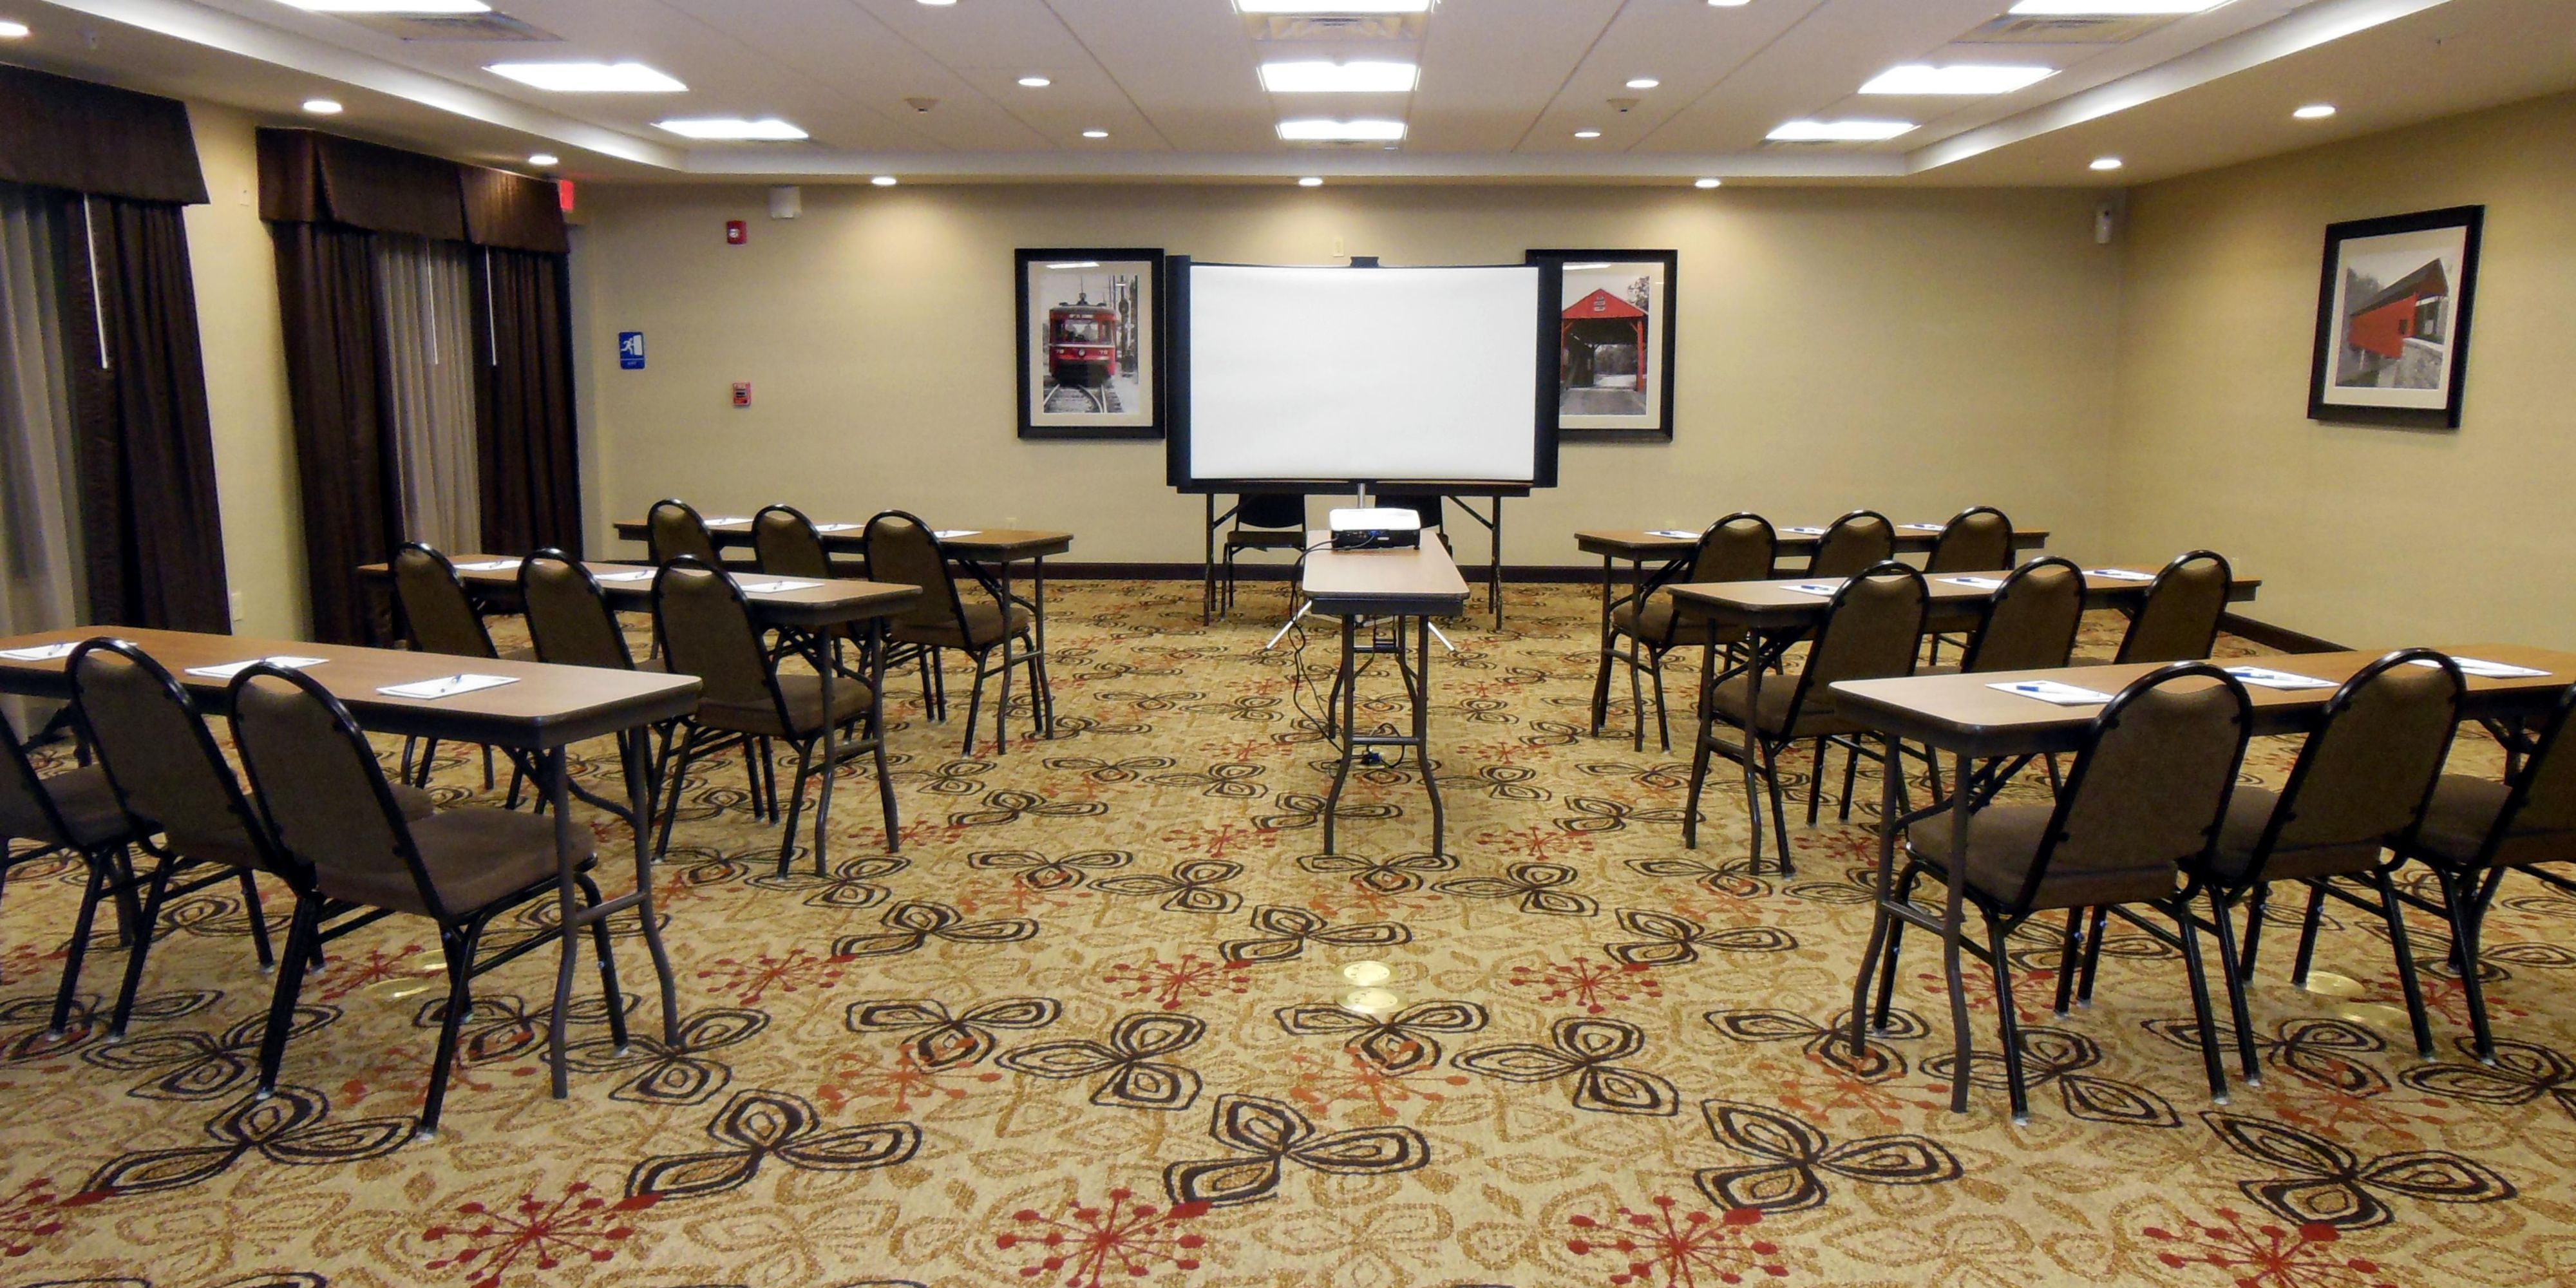 The Holiday Inn Express & Suites Meadowlands offer discounts for groups, teams, weddings and meeting space usage.  We have a large shuttle to take everyone to any event, restaurant, and recreational activity in the Washington, PA local area.  Stop by or call the hotel today for a tour, rate quote or any other questions. We are always available! 